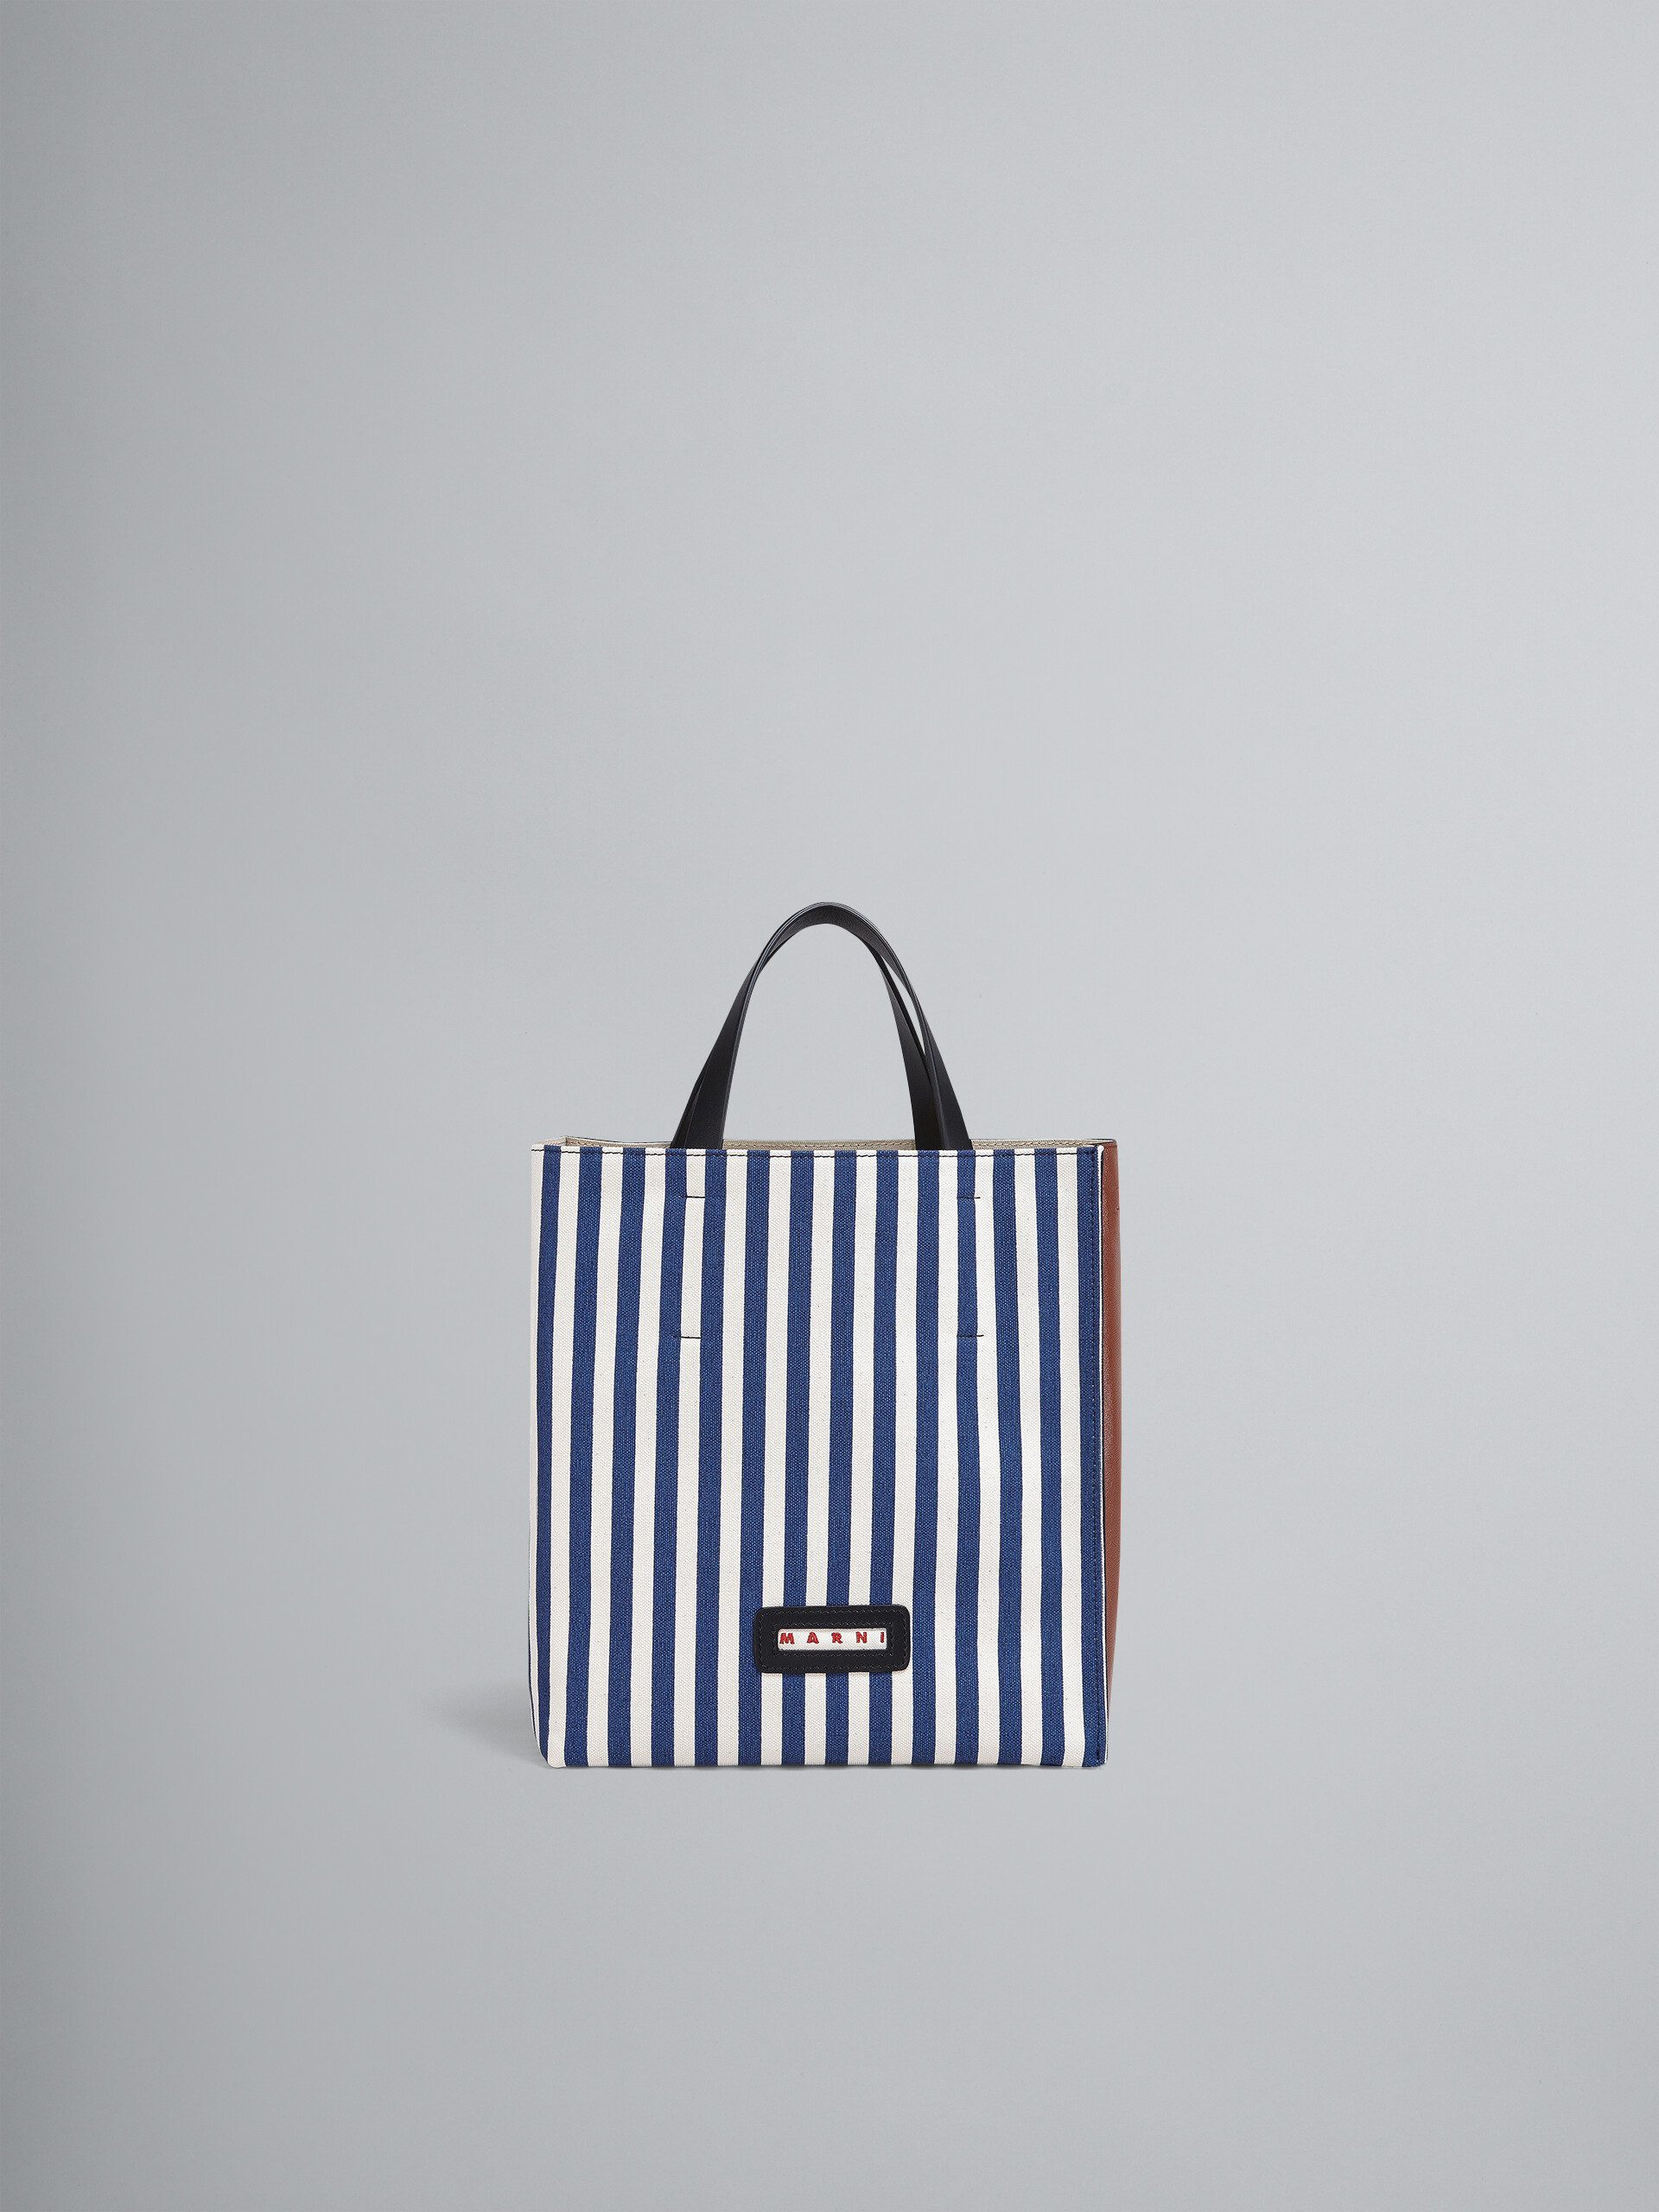 MUSEO SOFT small bag in blue striped canvas - Shopping Bags - Image 1